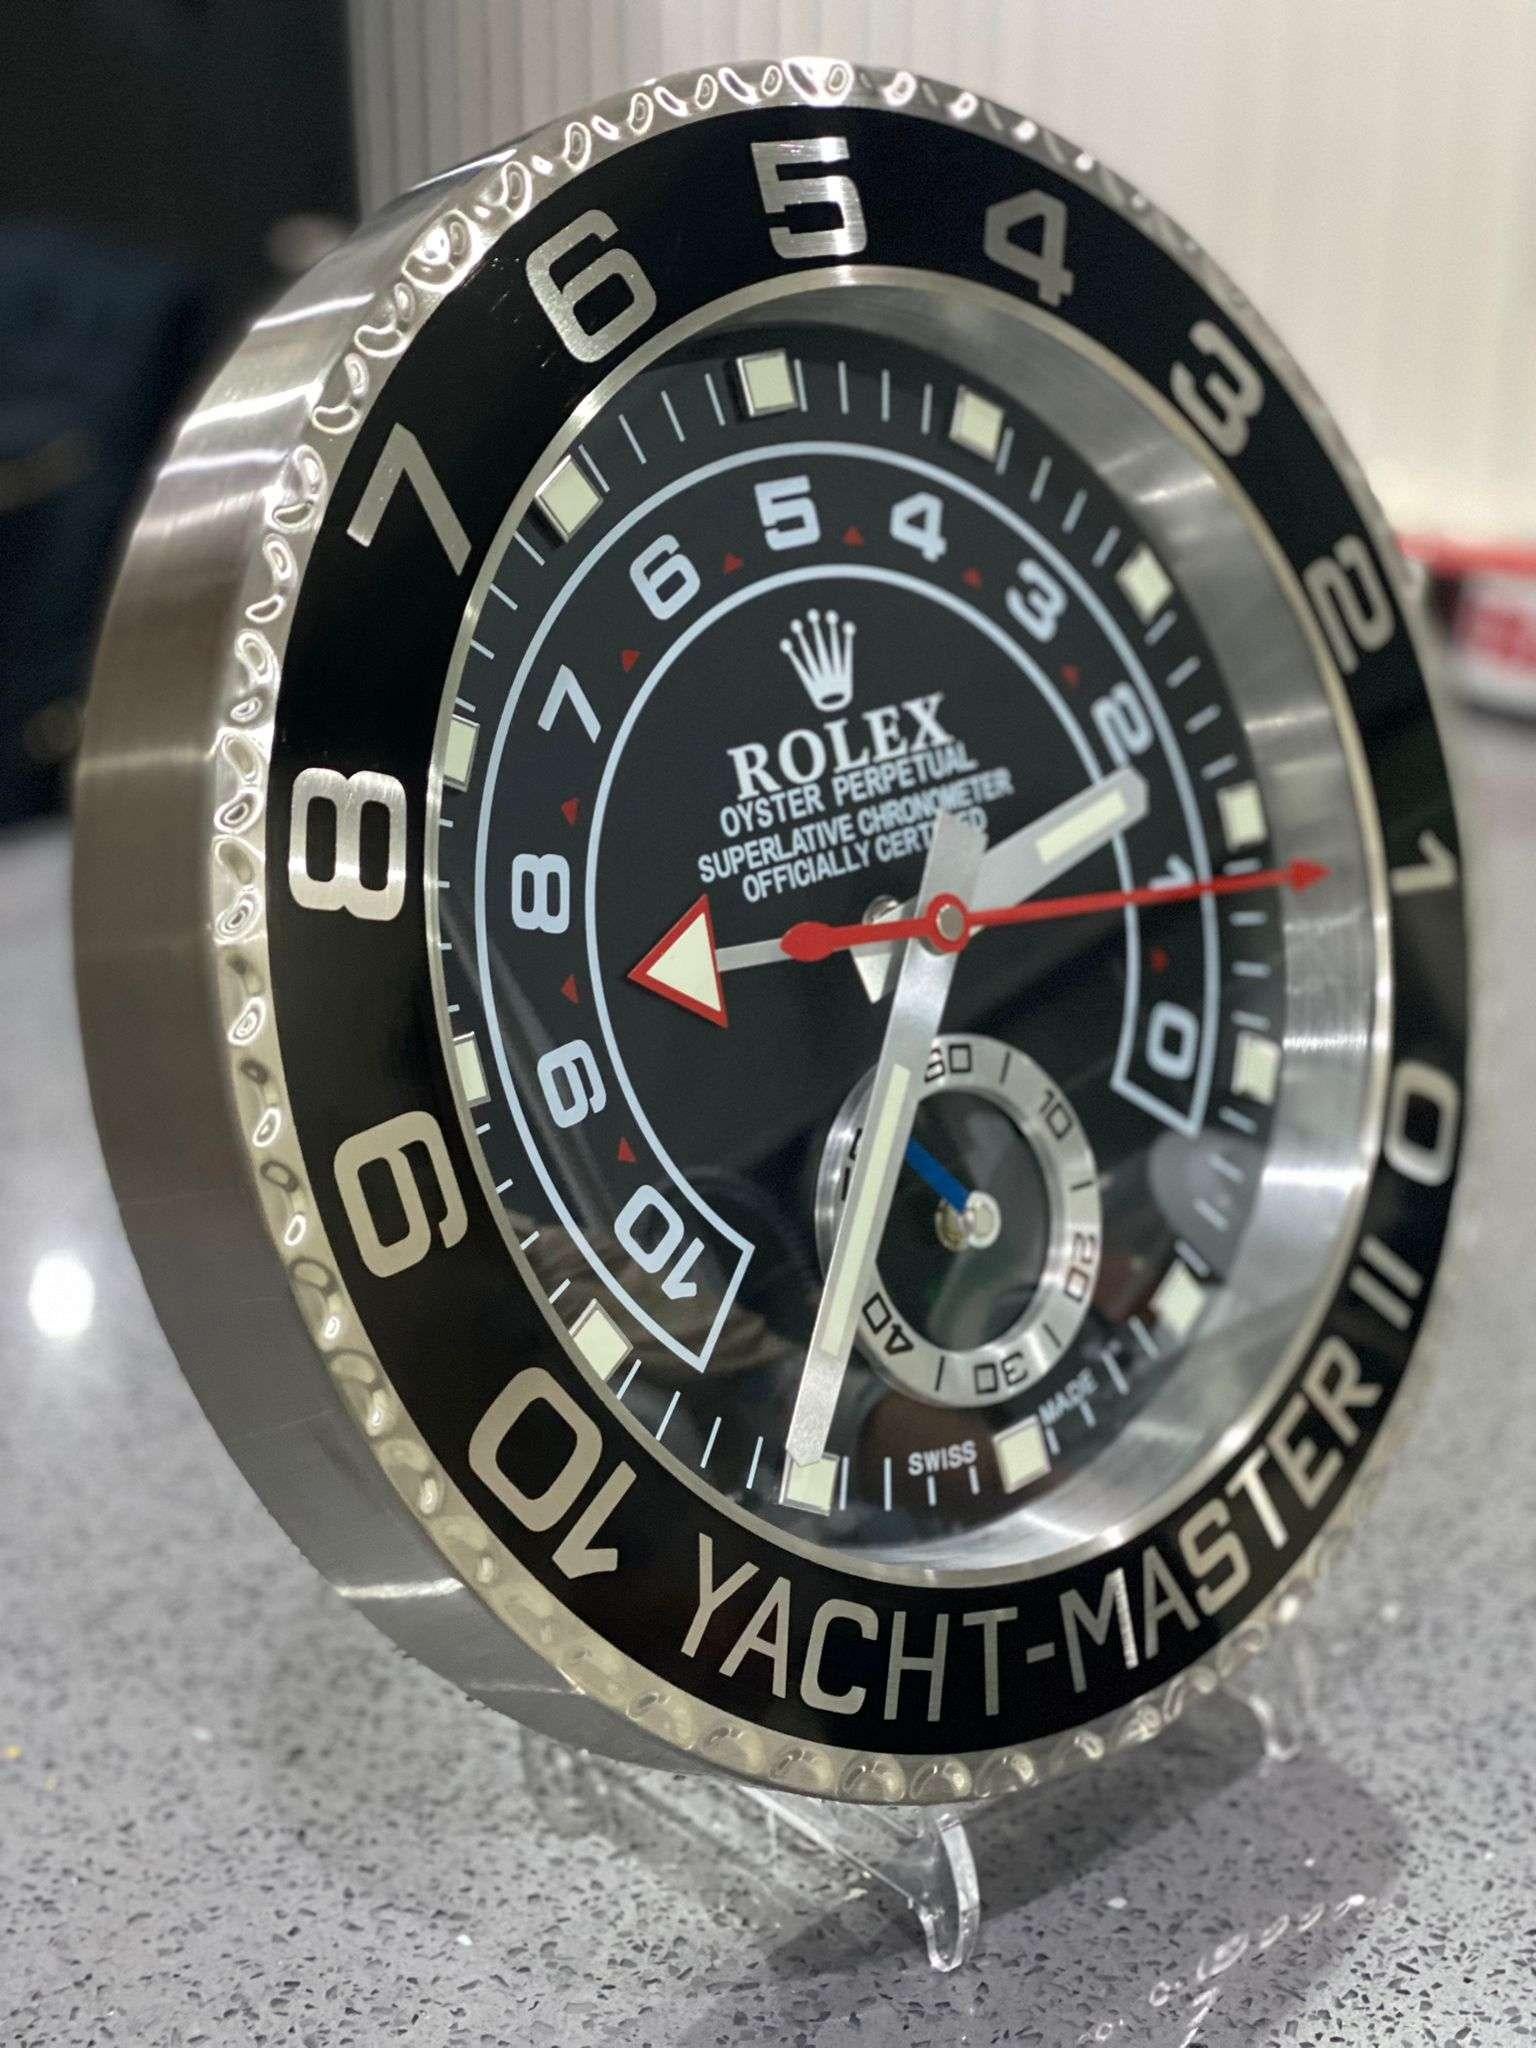 ROLEX Officially Certified Oyster Perpetual Black Yacht Master II Wall Clock 
Good condition, working.
Lume strips Sweeping Quartz movement powered by single AA Battery.
Clock dimensions measure approximately 35cm by 5cm thickness
Free international